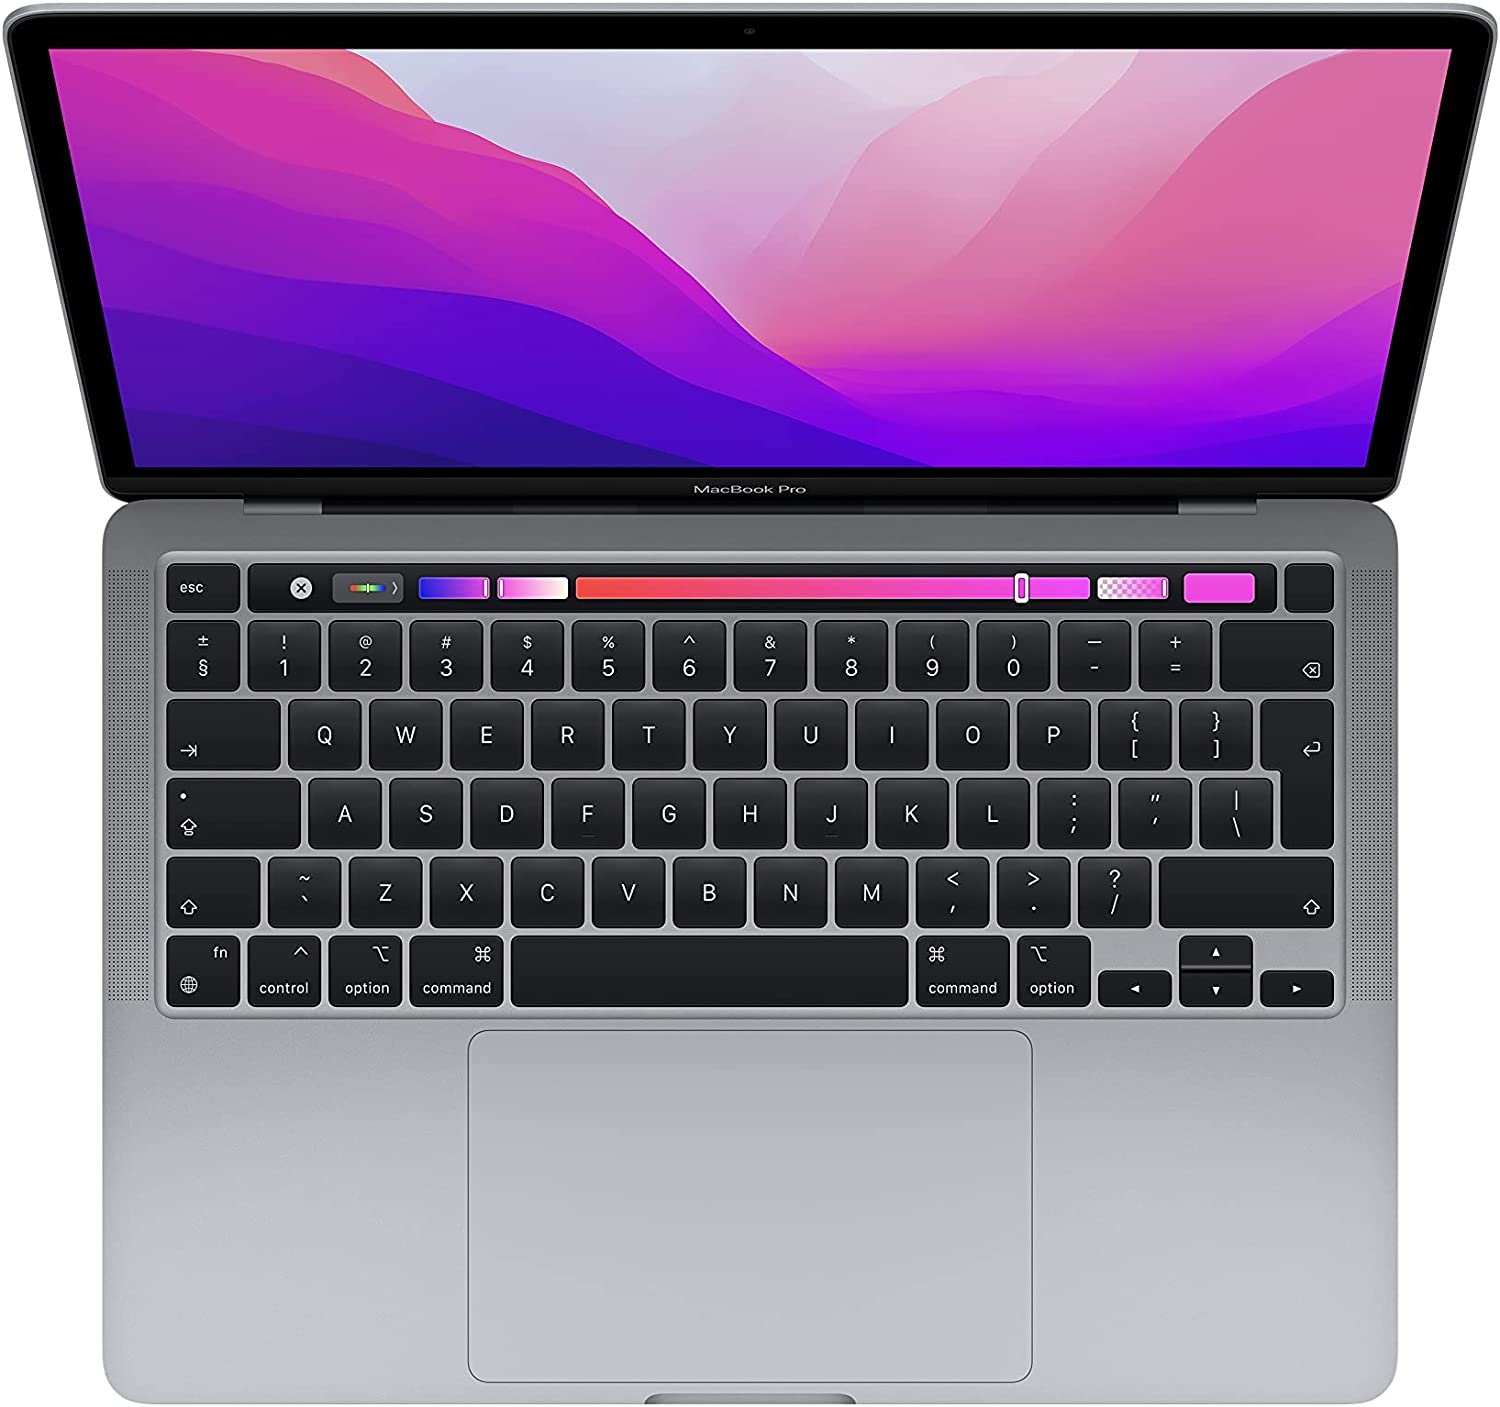 Apple MacBook Pro 2022 with M2 chip: 13-inch Retina display, 8GB RAM, with Touch Bar - Space Gray